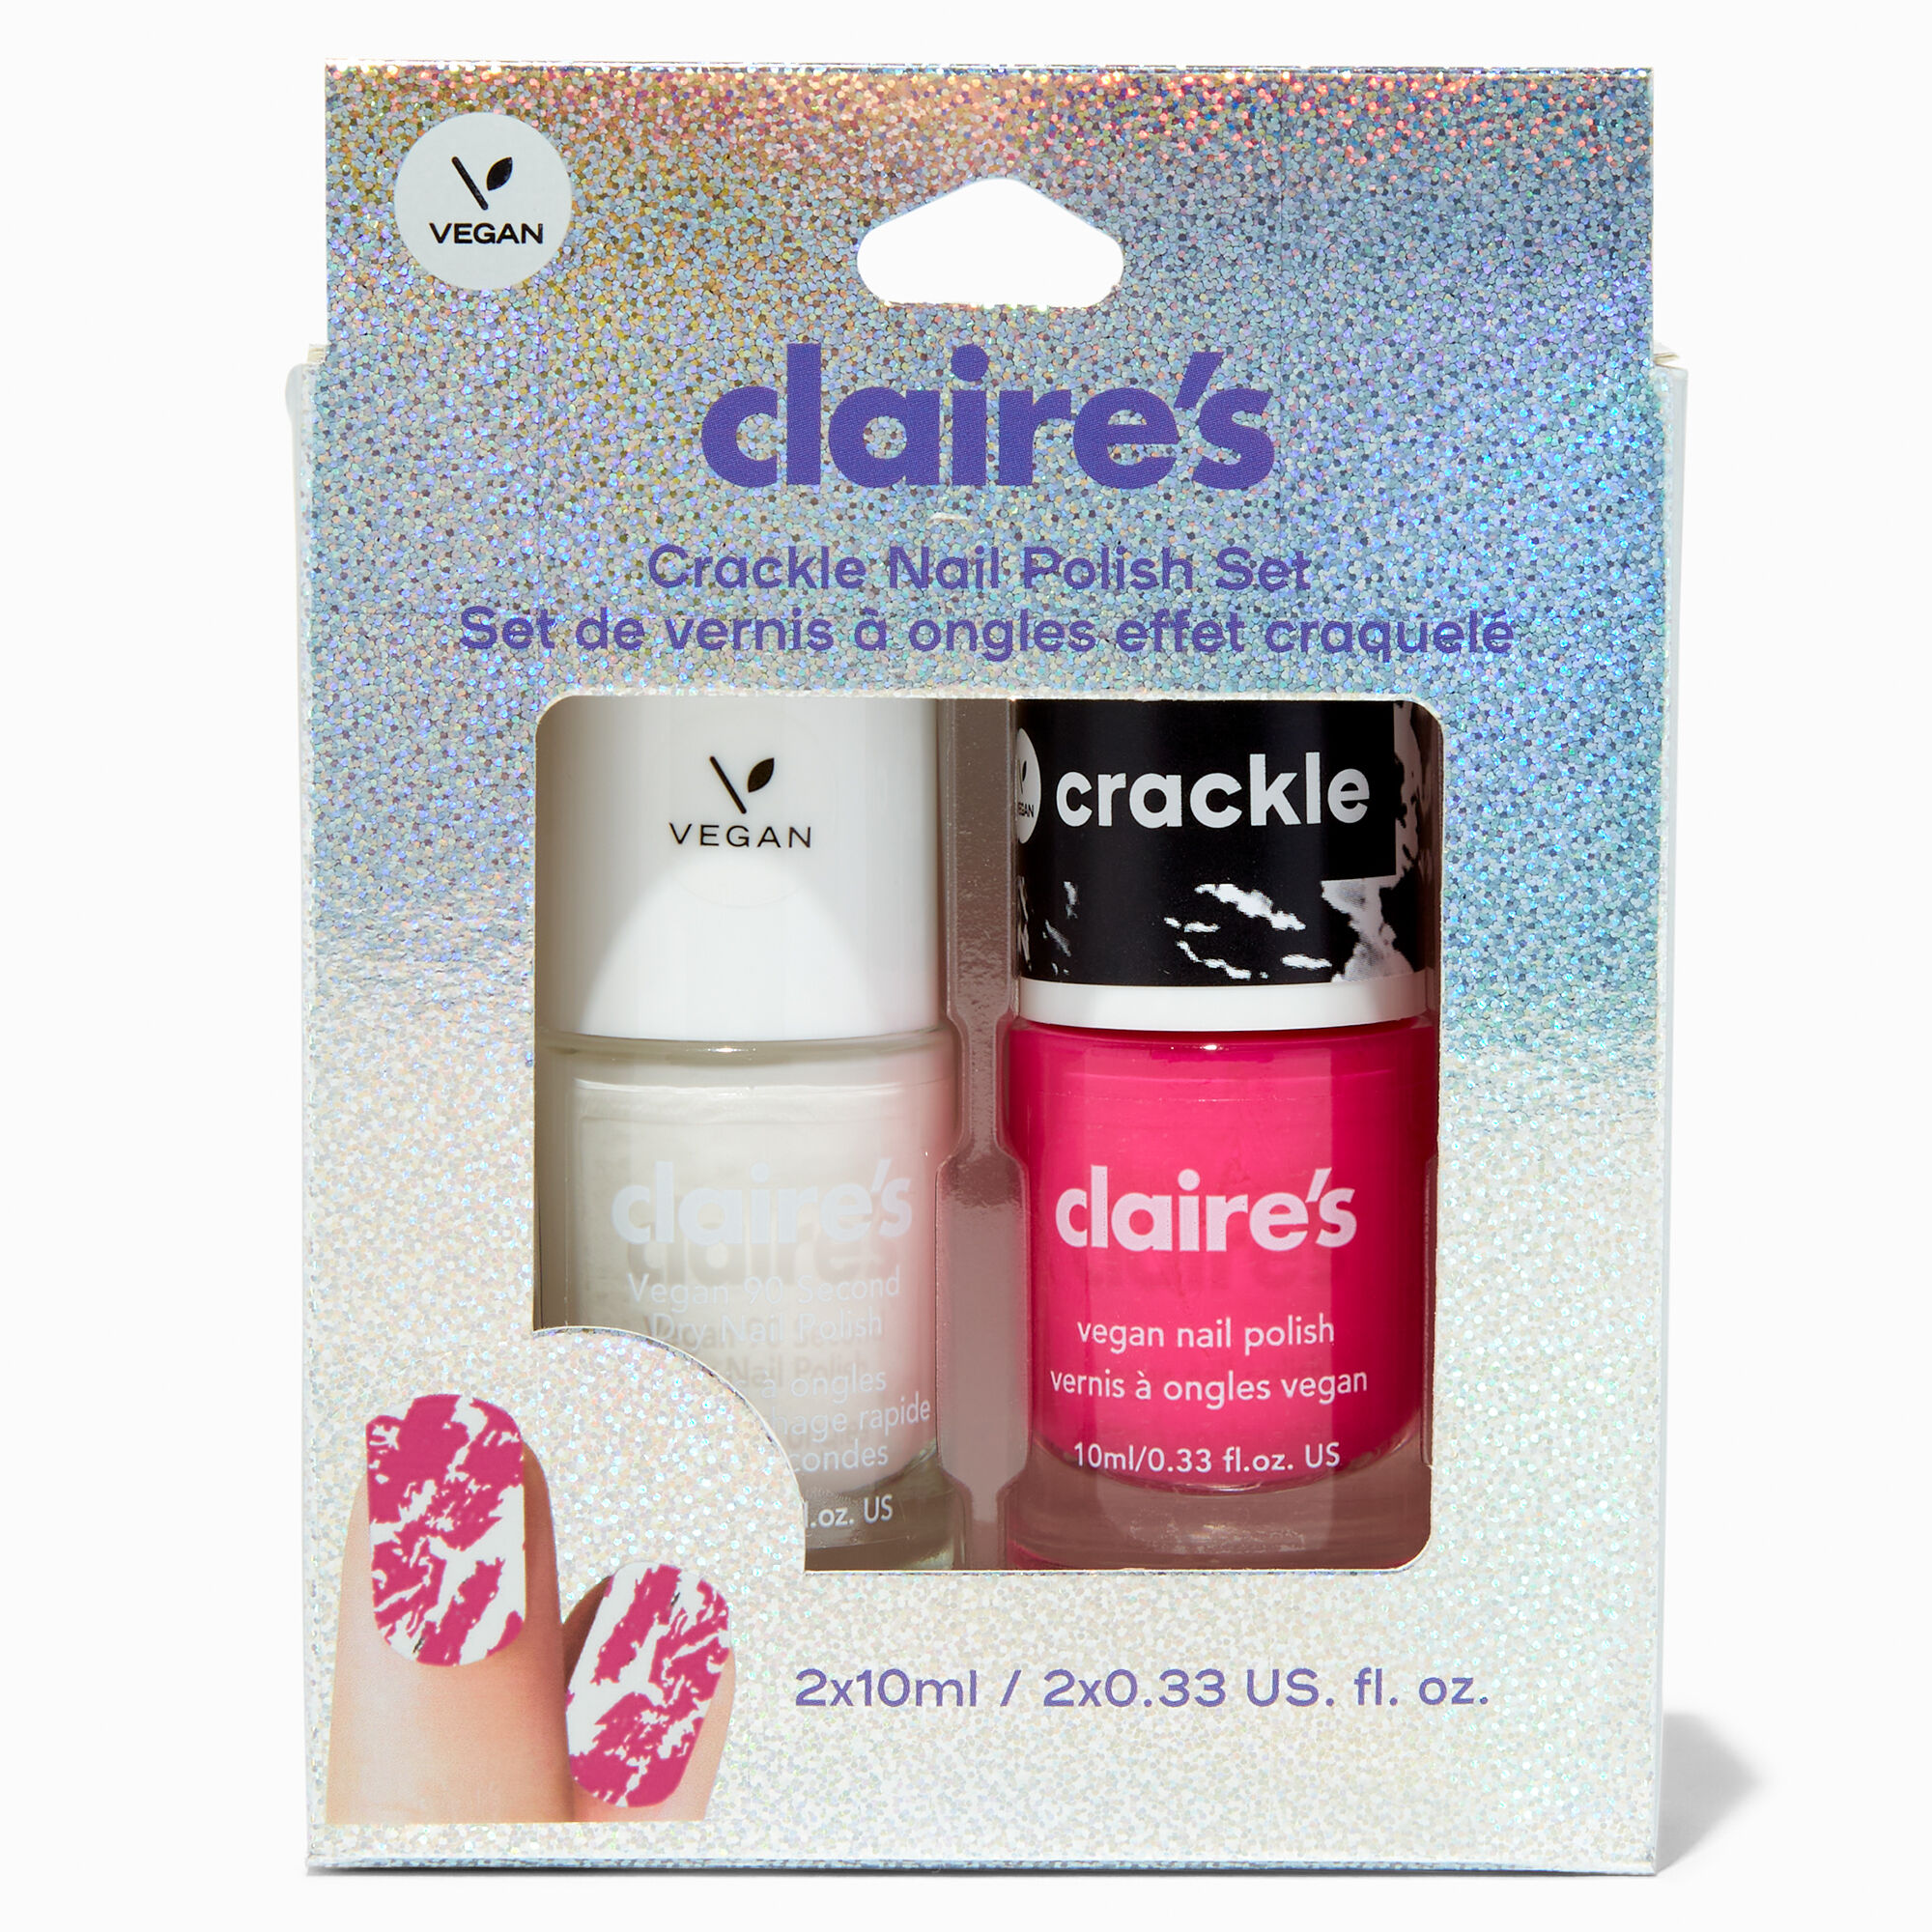 View Claires Pink Crackle Vegan Nail Polish Set 2 Pack White information